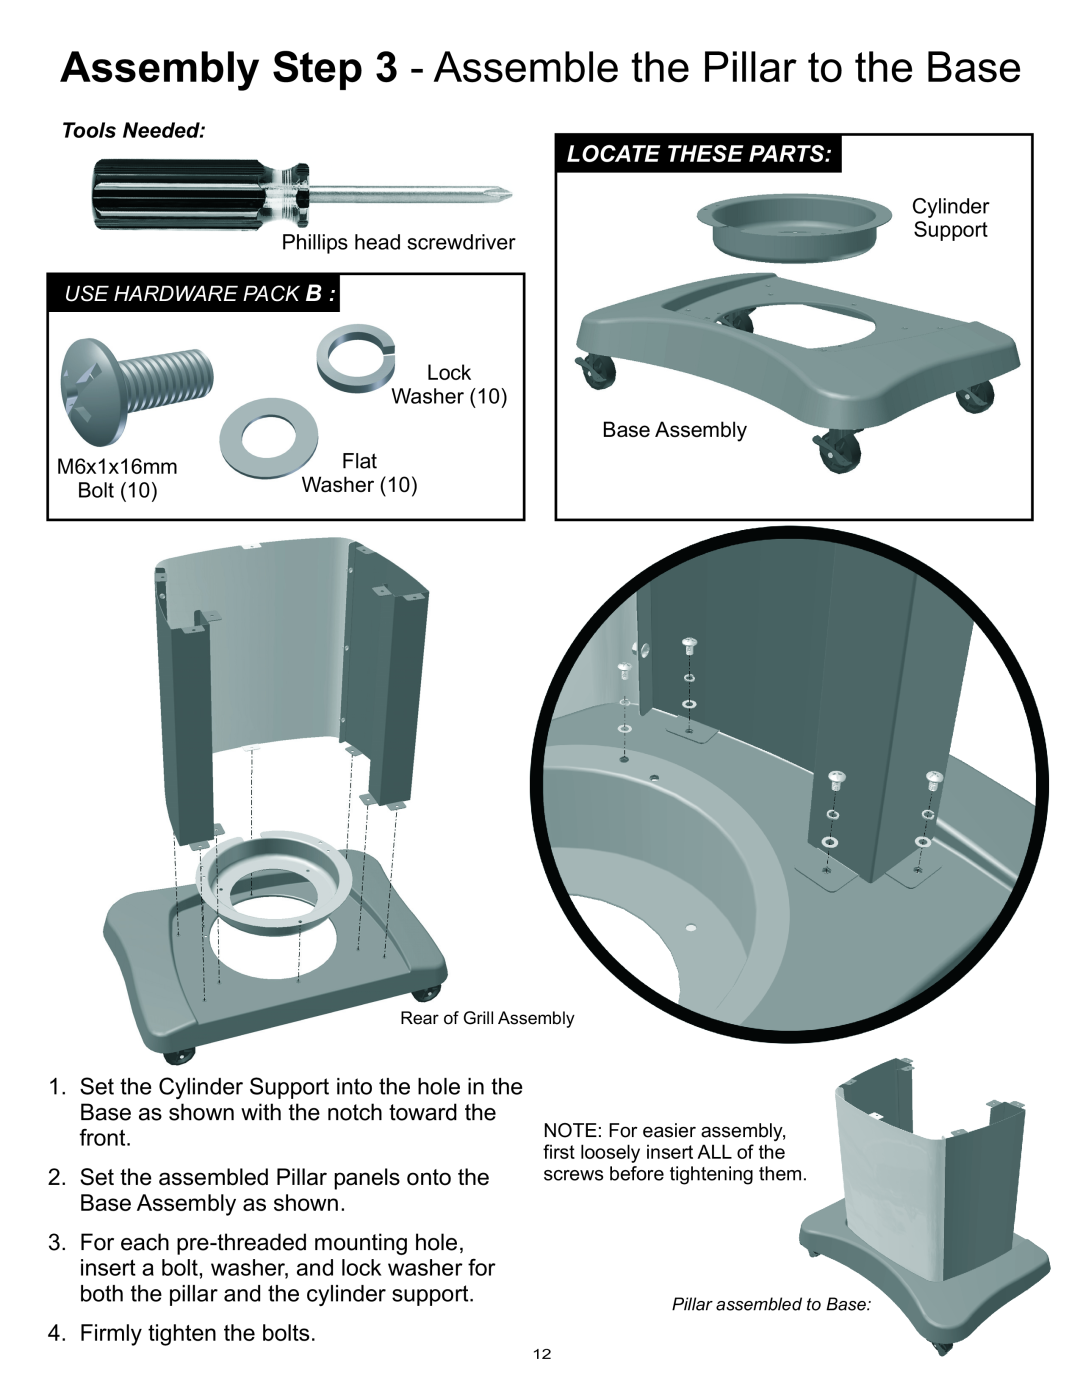 Vermont Casting Gas Grill owner manual Assembly - Assemble the Pillar to the Base, Locate These Parts 